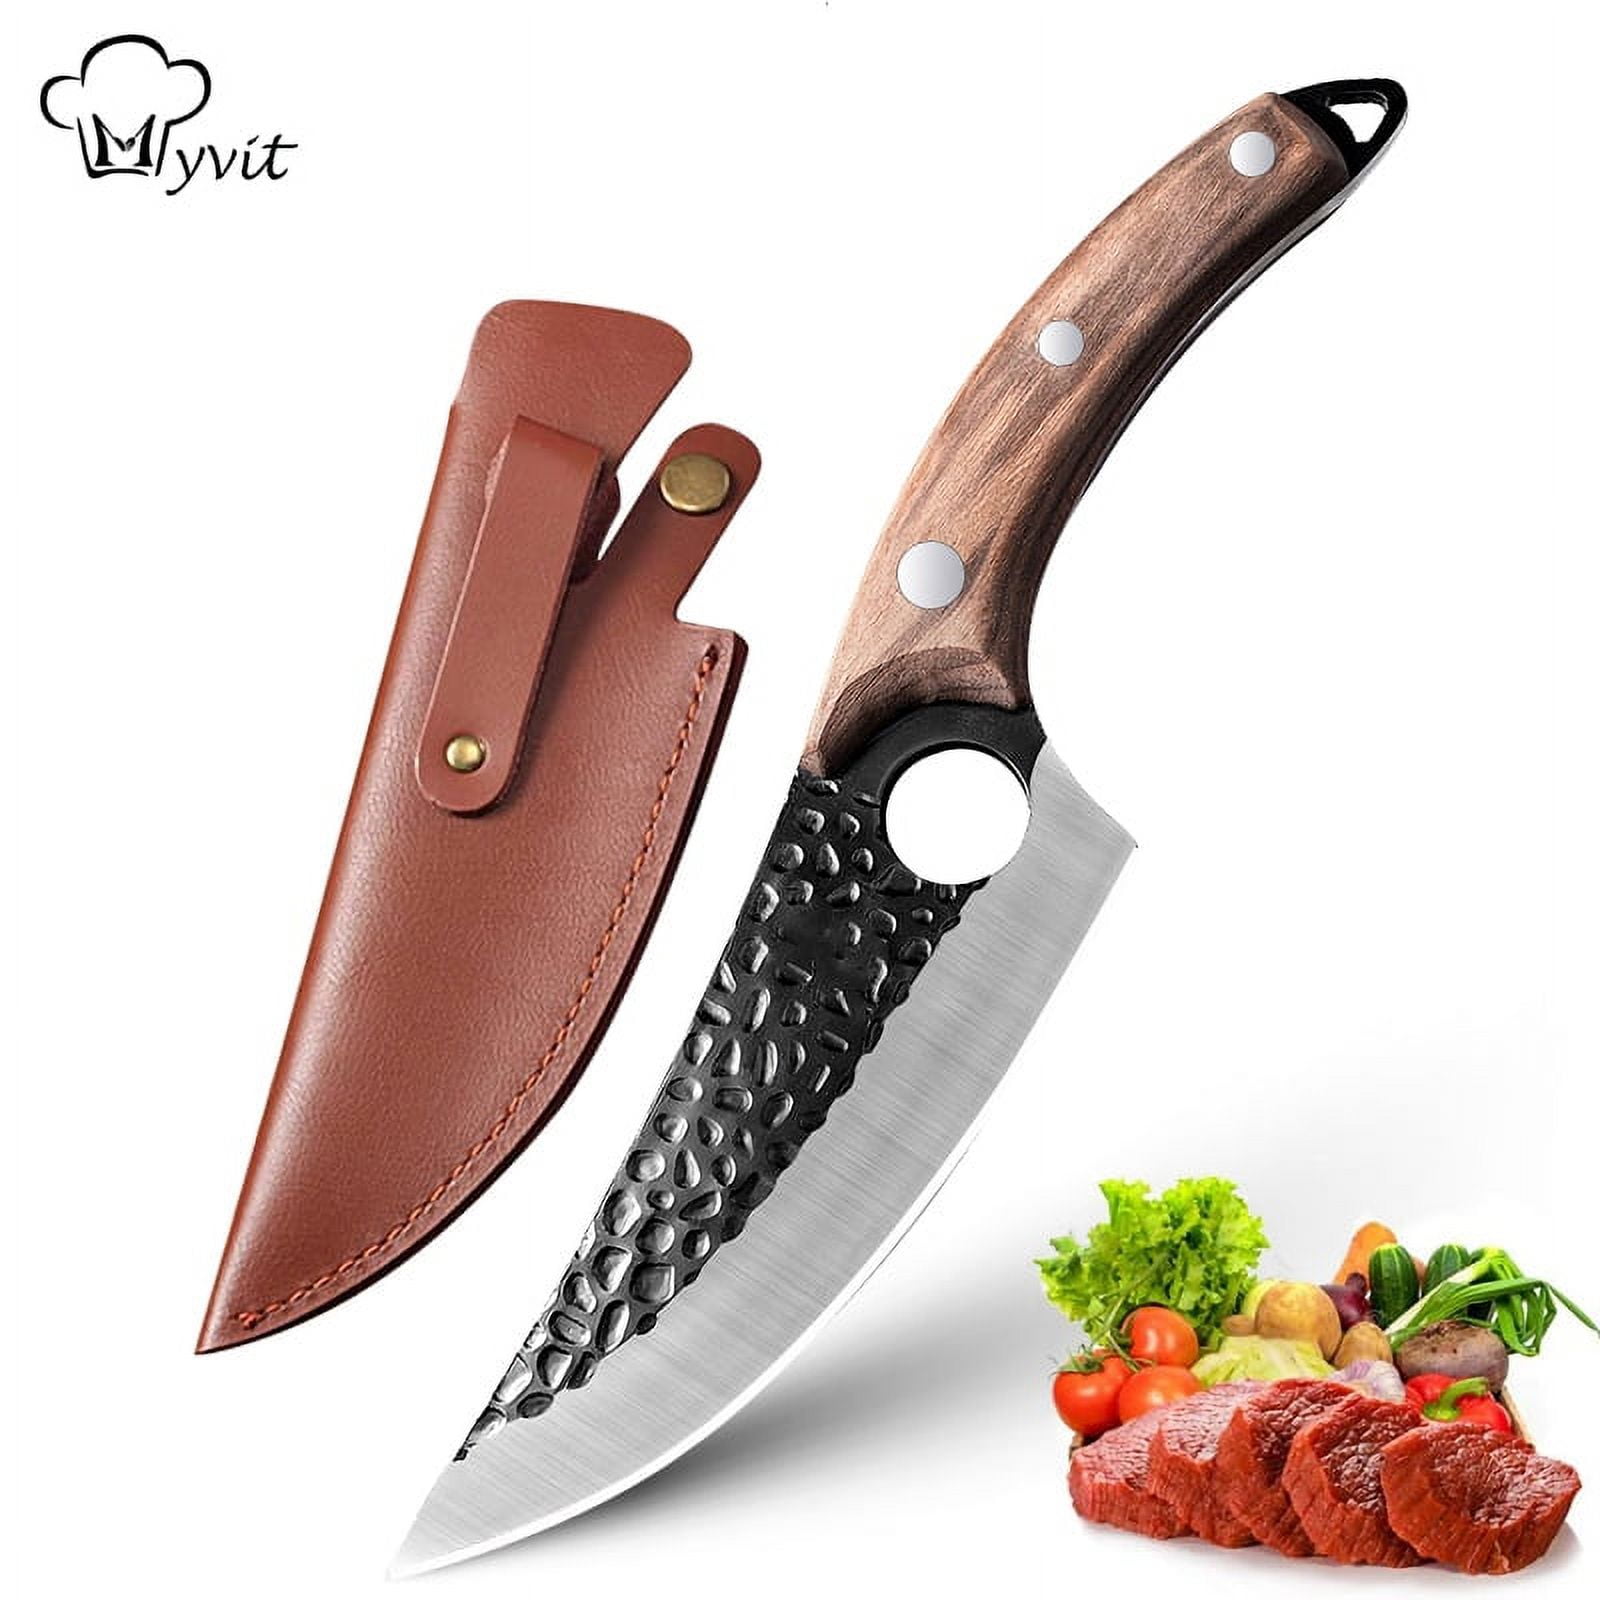 Huusk Chef Knife Set Hand Forged Japanese Kitchen Knife with Sheath Outdoor  Cooking Camping Knife Set: Home & Kitchen 